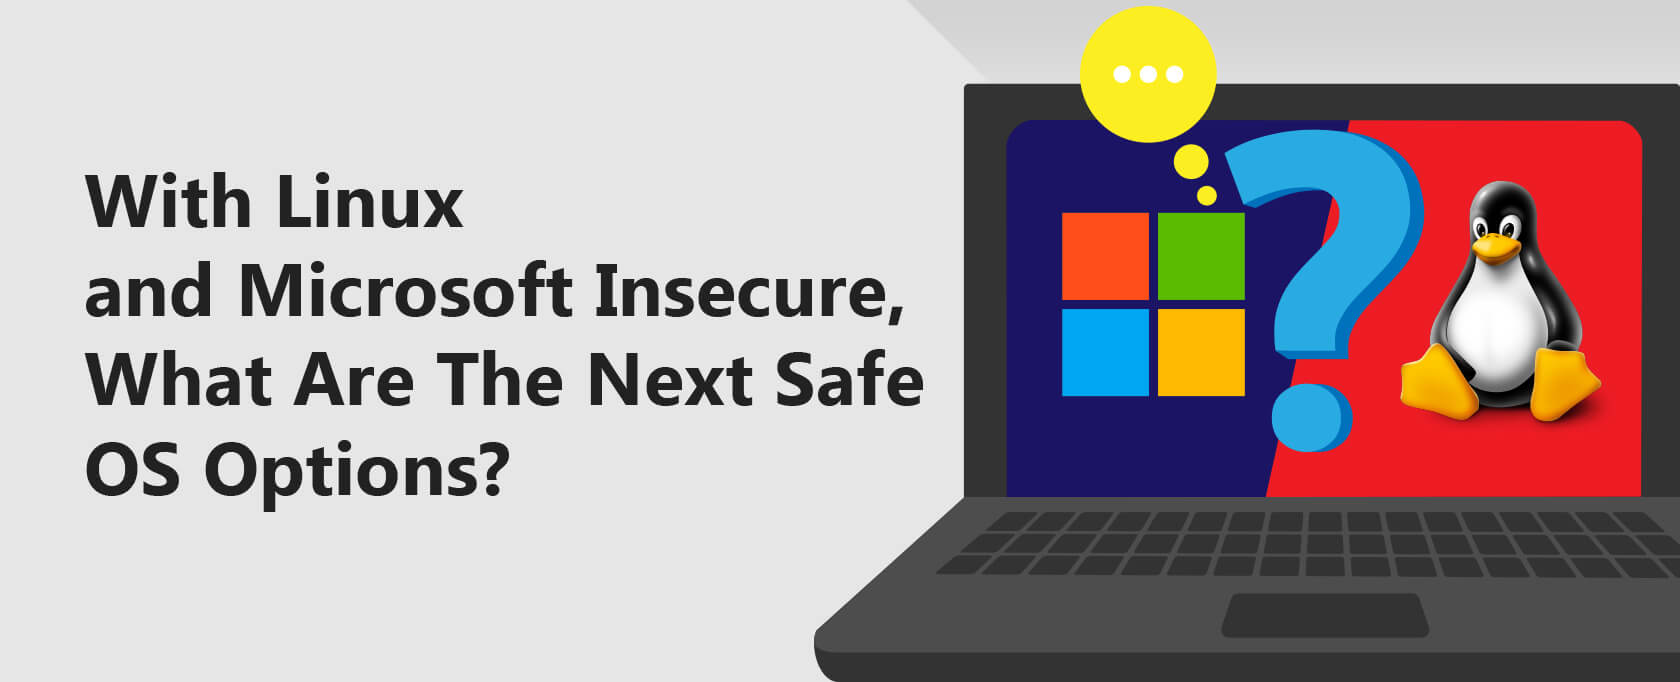 With Linux and Microsoft Insecure, What Are The Next Safe OS Options?